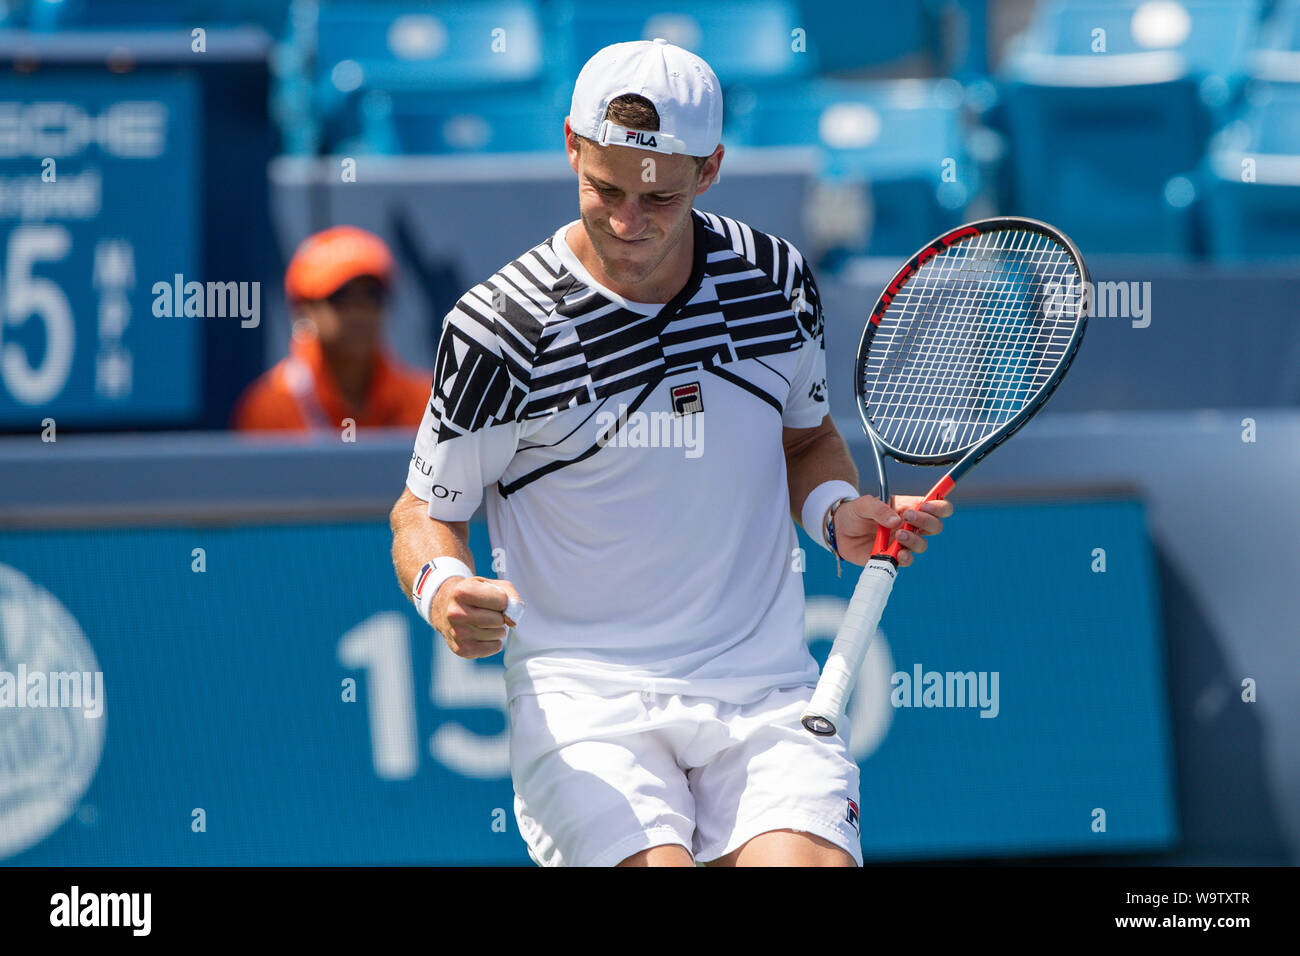 Mason Ohio Usa 15th Aug 2019 Diego Schwartzman Arg Reacts After Winning A Point During Thursday S